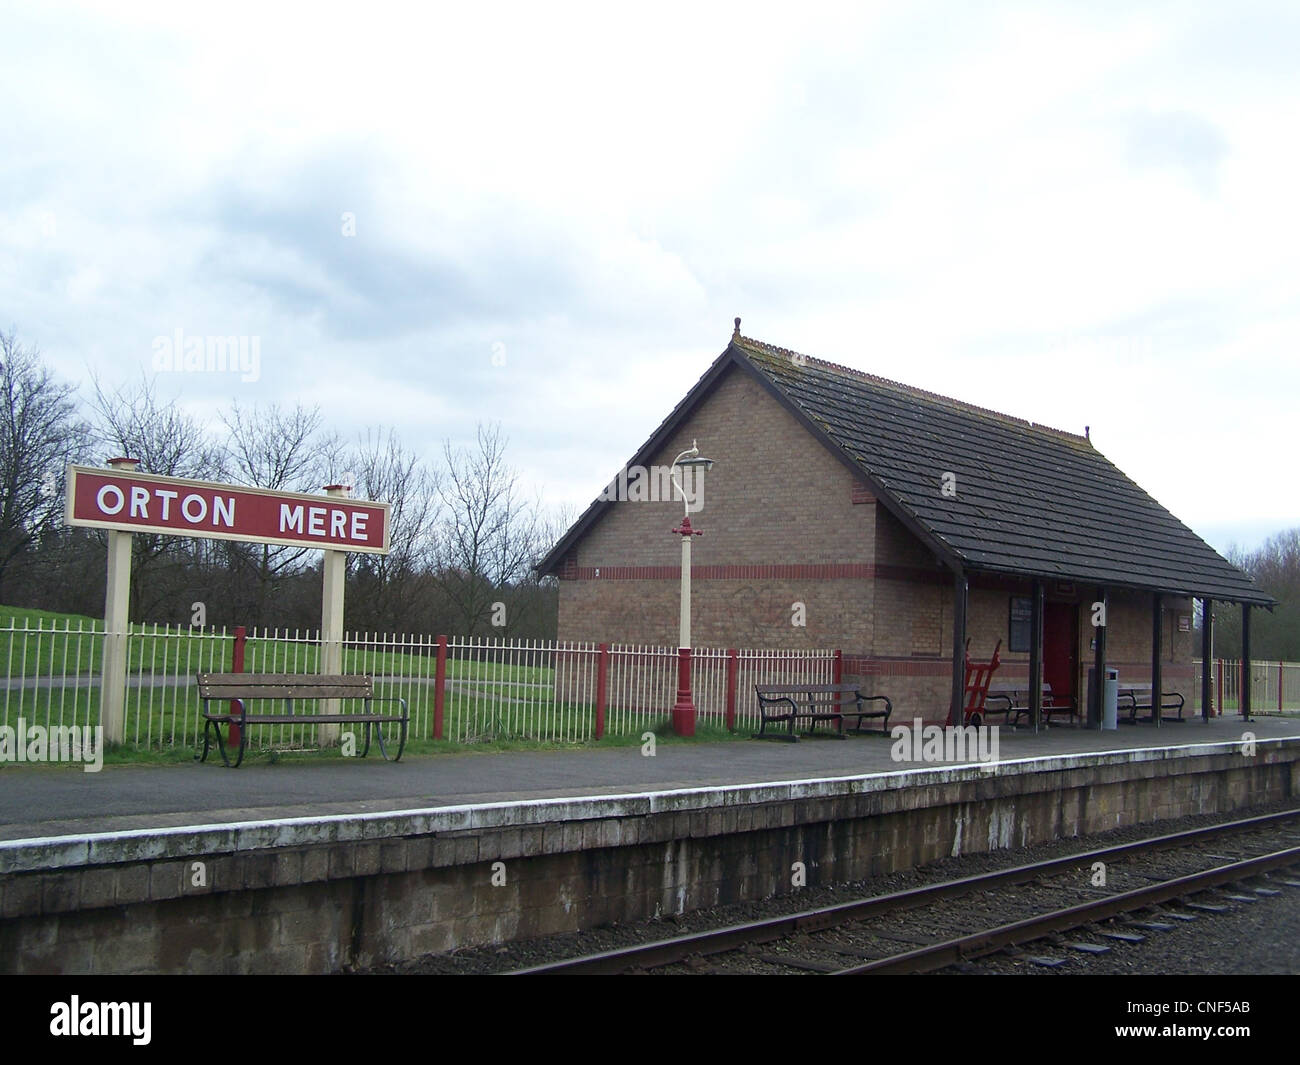 The Orton Mere station building, constructed in 1983. Stock Photo